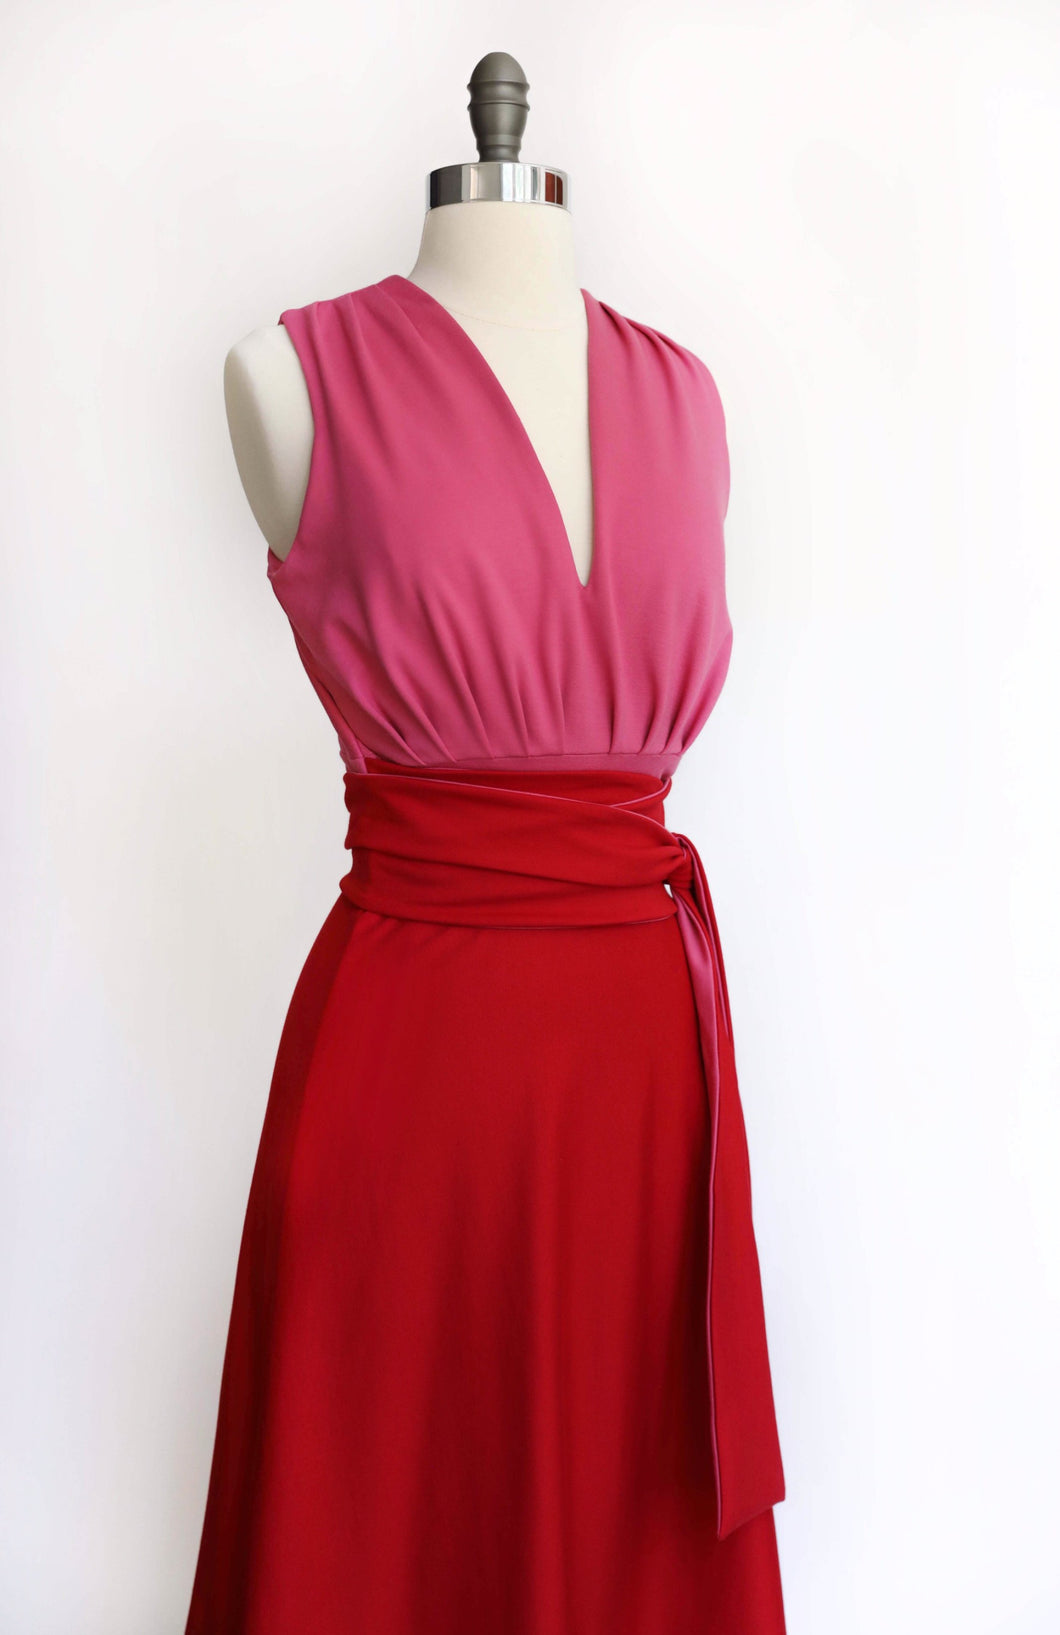 THAT DRESS~ PINK AND RED